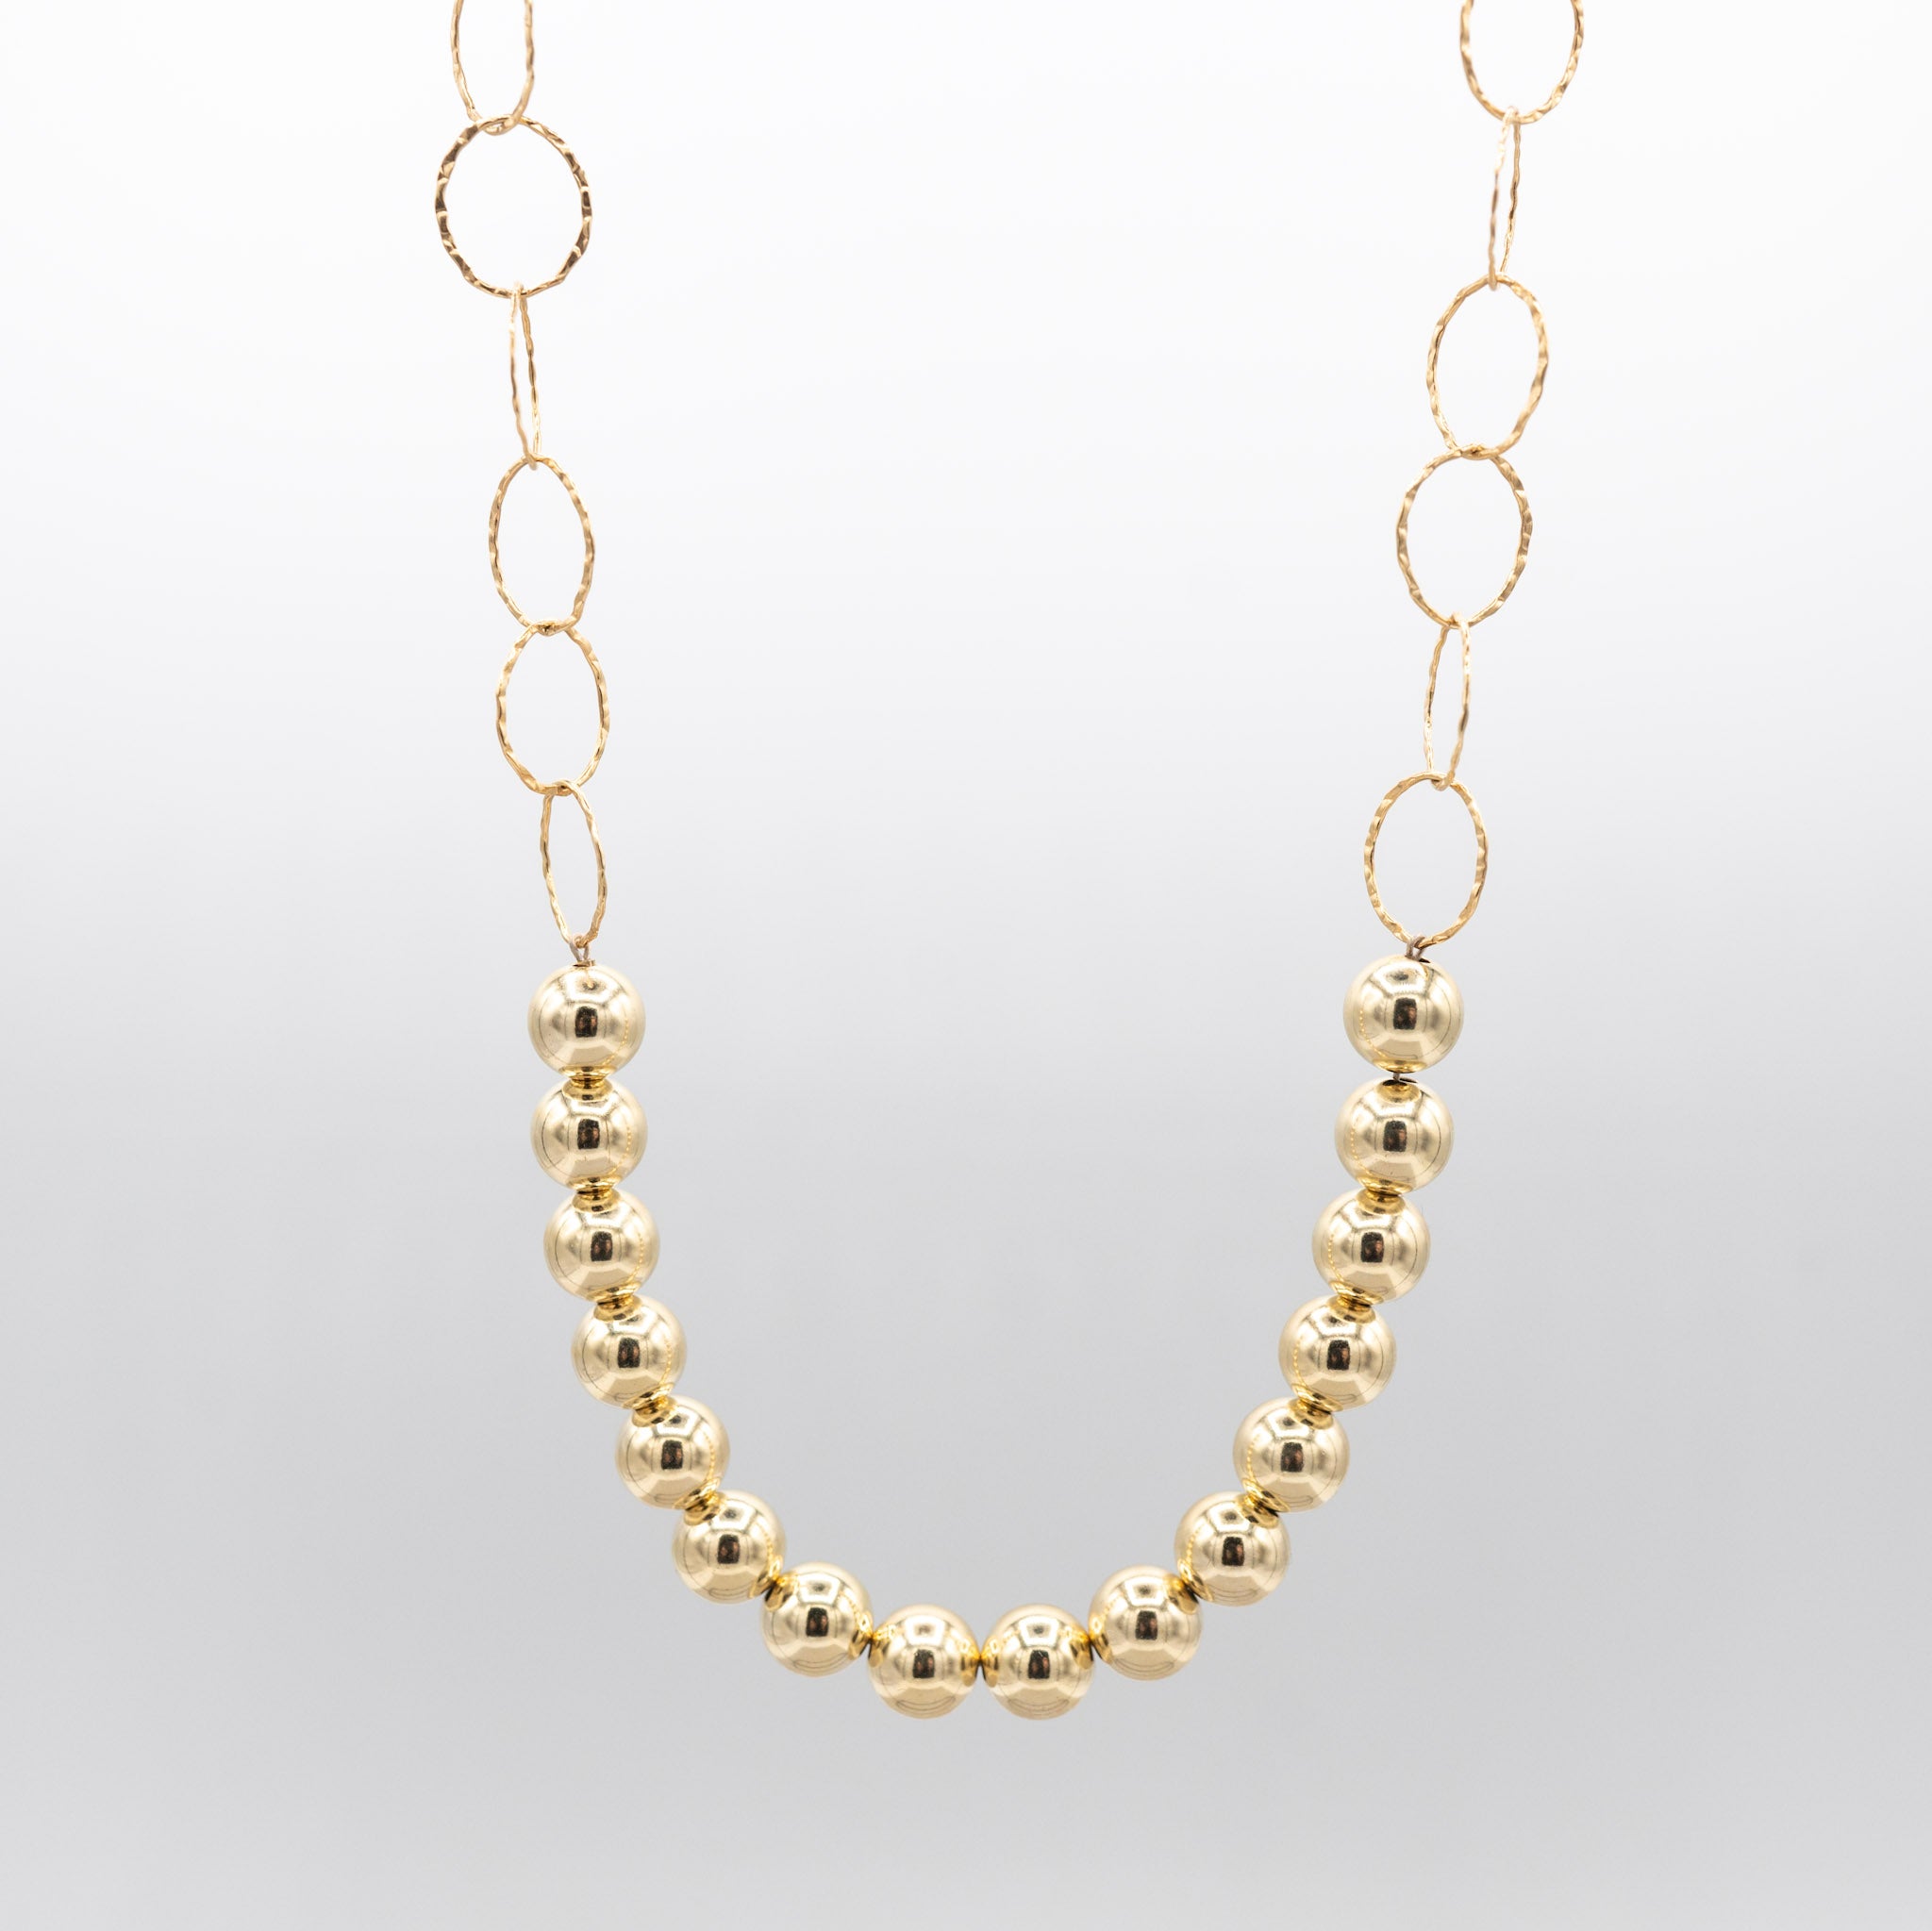 10mm 14k Gold Filled Beaded Lux & Chain Necklace